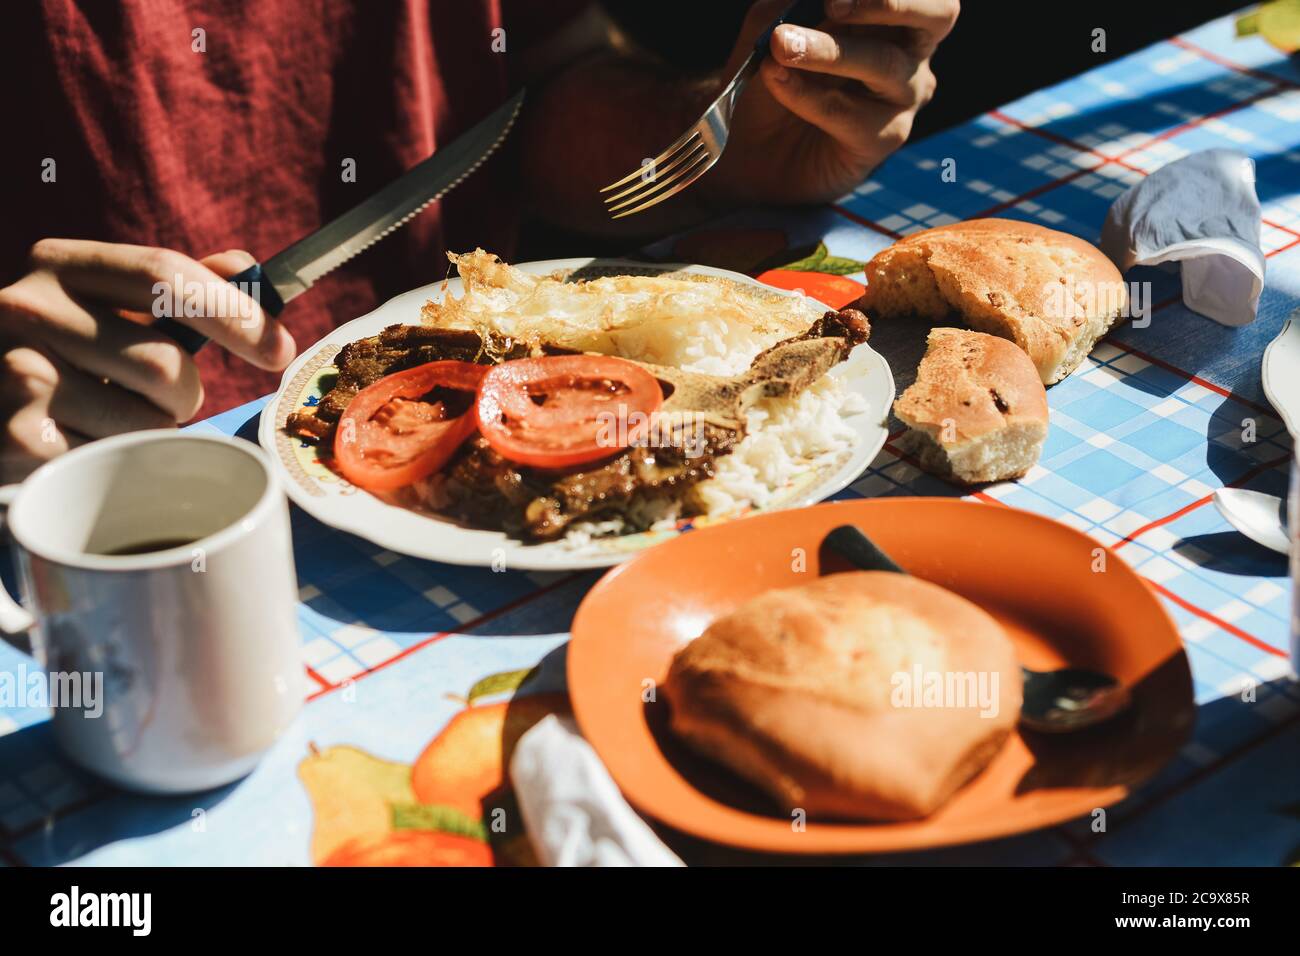 A person has breakfast in a traditional bolivian market from the Yungas region in Bolivia. This food is well known as 'desayuno yungueño' and includes Stock Photo